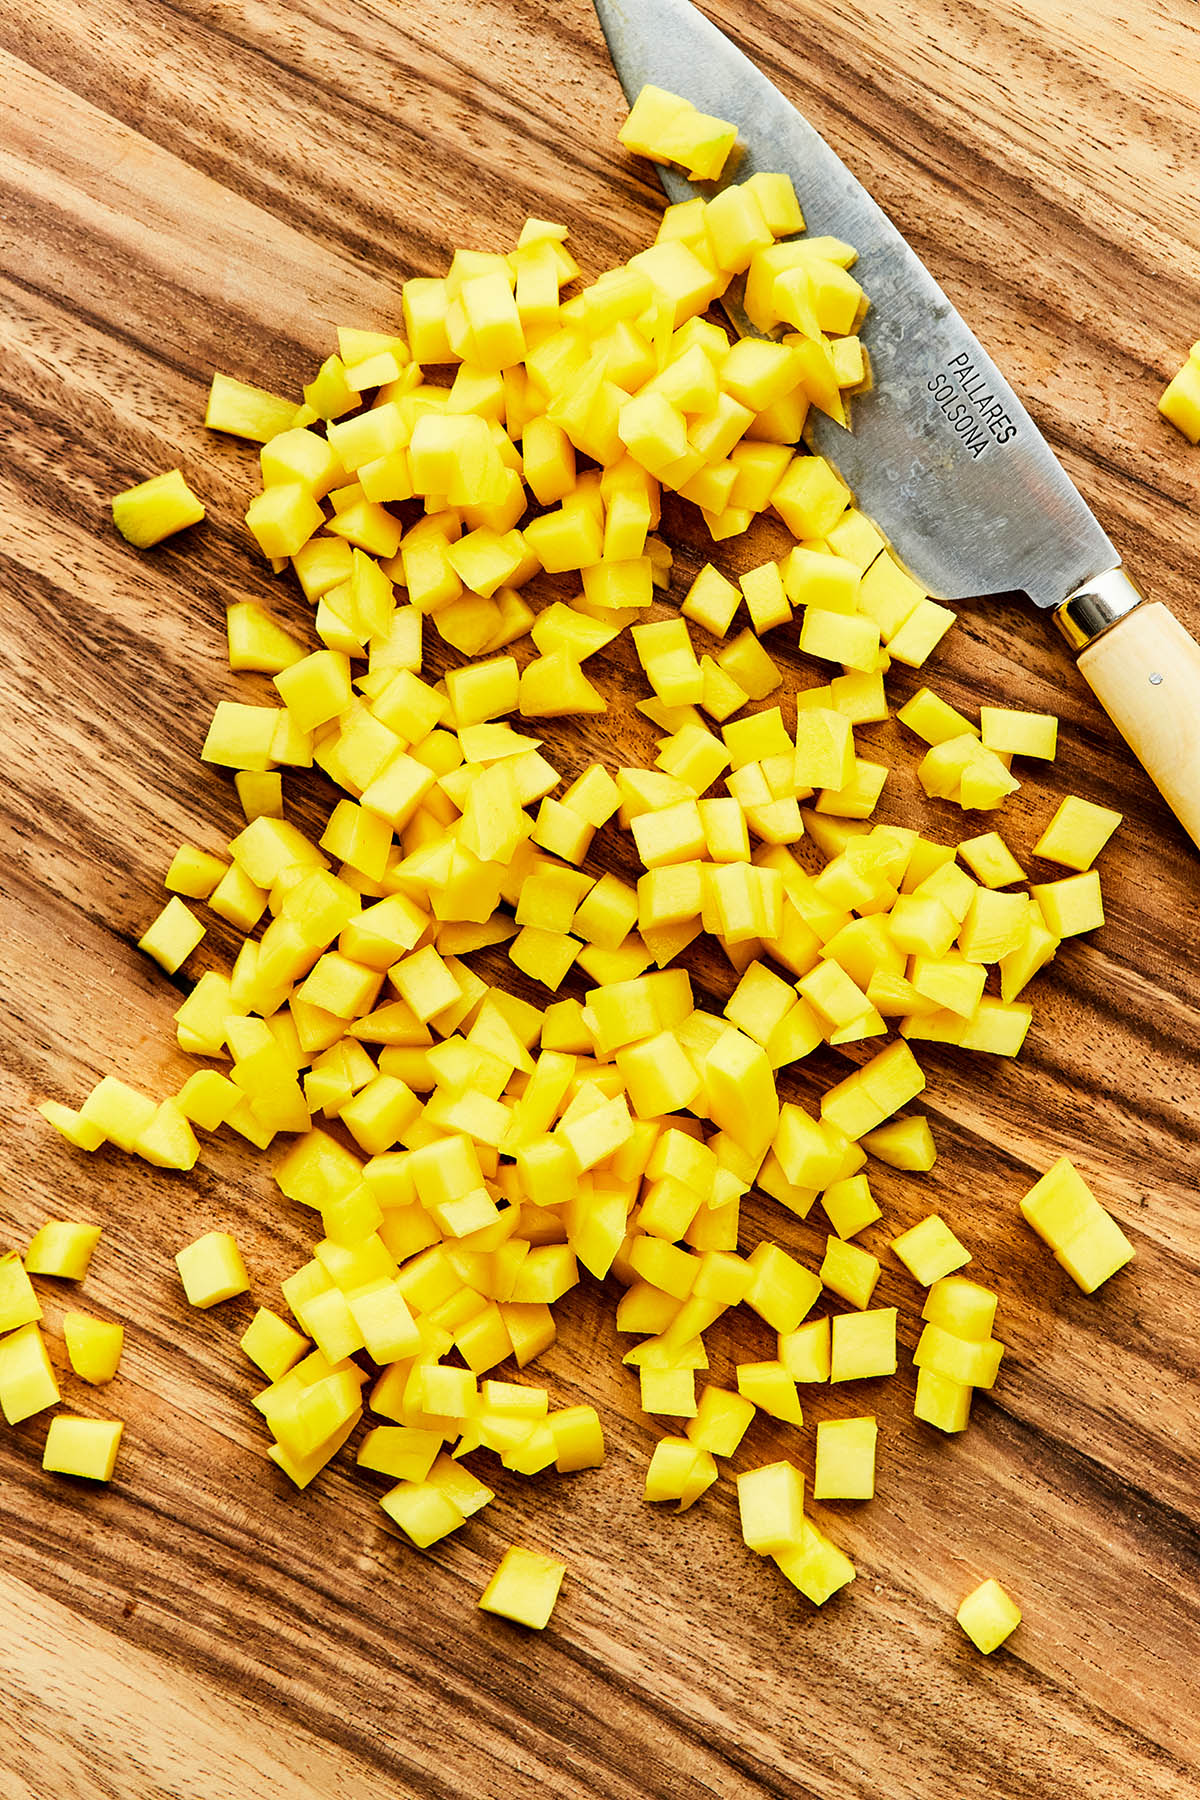 Finely diced mango on a wooden cutting board.